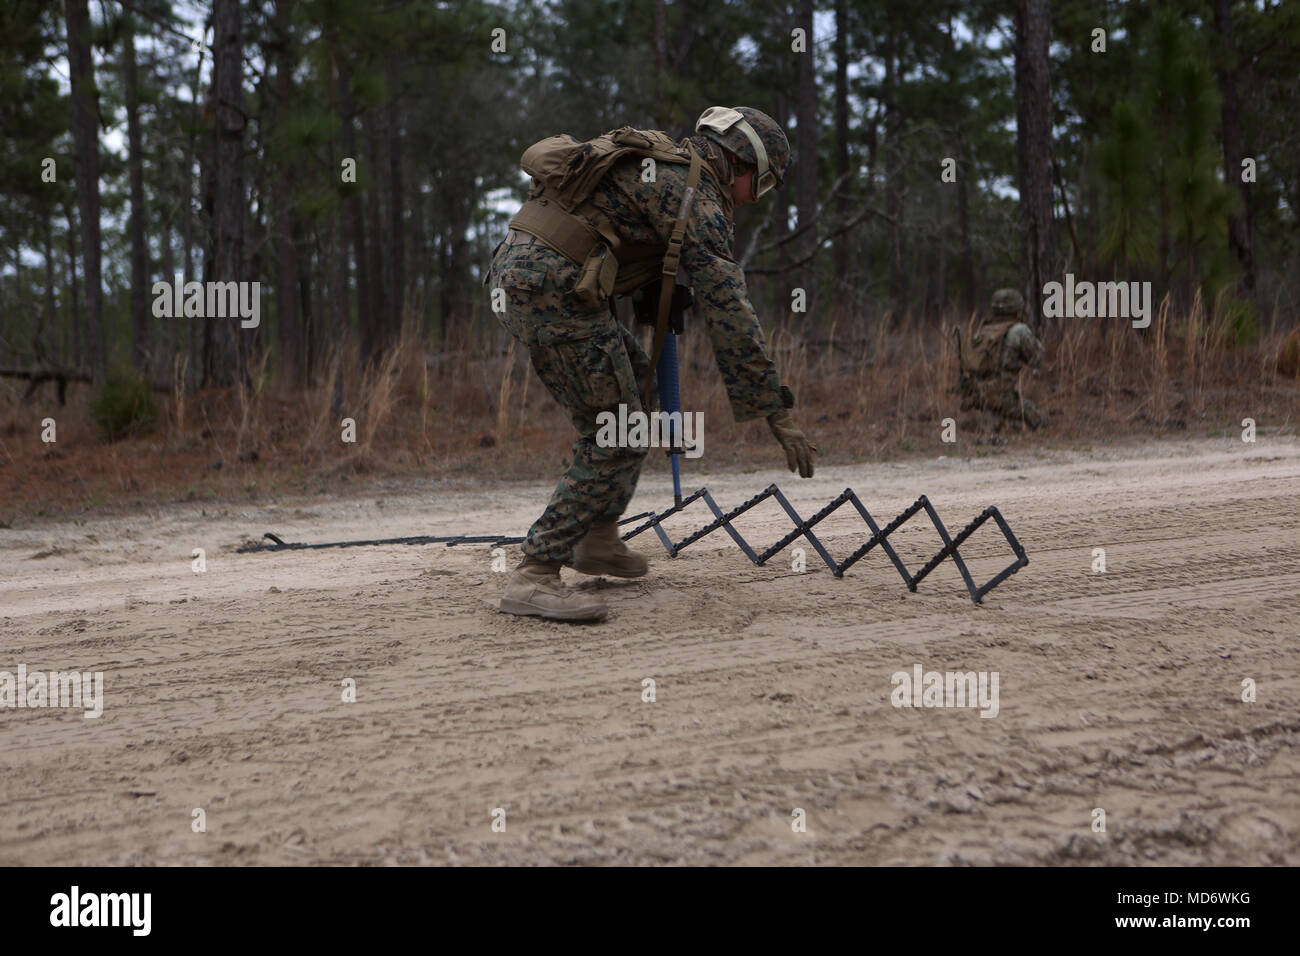 U.S. Marine Lance Cpl. Jared Gillan, a military policeman with 2nd Law Enforcement Battalion, 2nd Marine Information Group, lays down a spike strip during a close quarter’s tactics enabler’s course at Camp Lejeune, N.C., March 27, 2018. The course provided Marines the opportunity to improve fire and movement tactics as a security platoon element. Marines participated in the training in preparation for their upcoming deployment with 22nd Marine Expeditionary Unit. (U.S. Marine Corps Photo by Pfc. Heather Atherton) Stock Photo